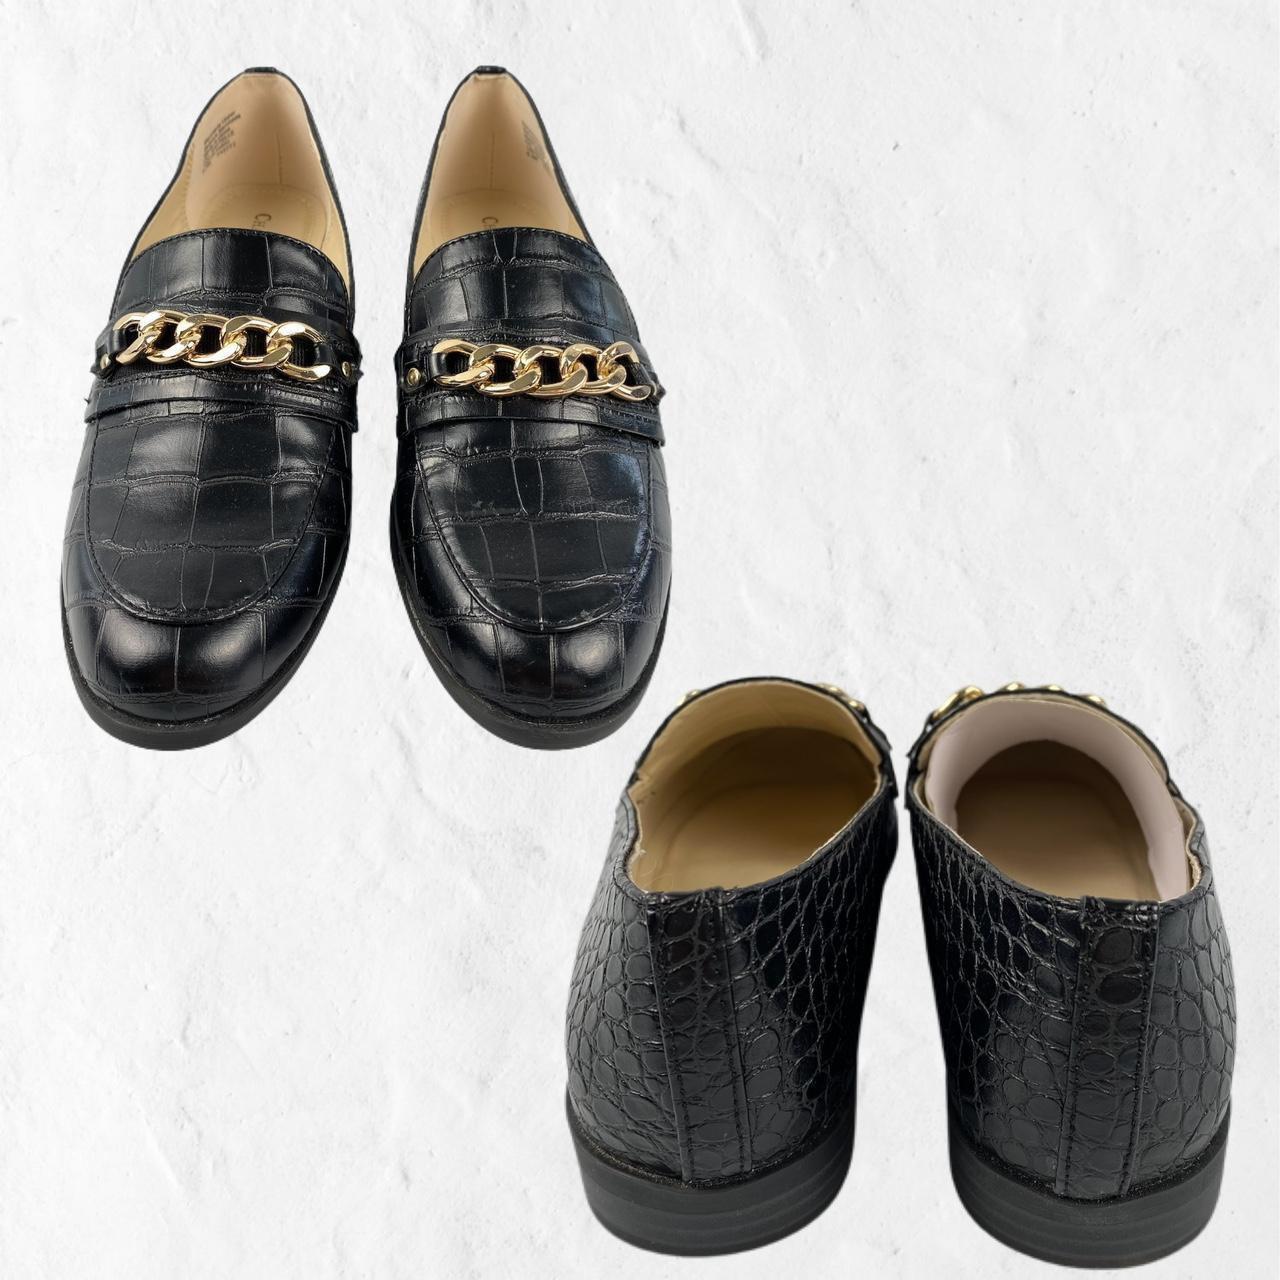 Charter Club Women's Black and Gold Loafers (3)